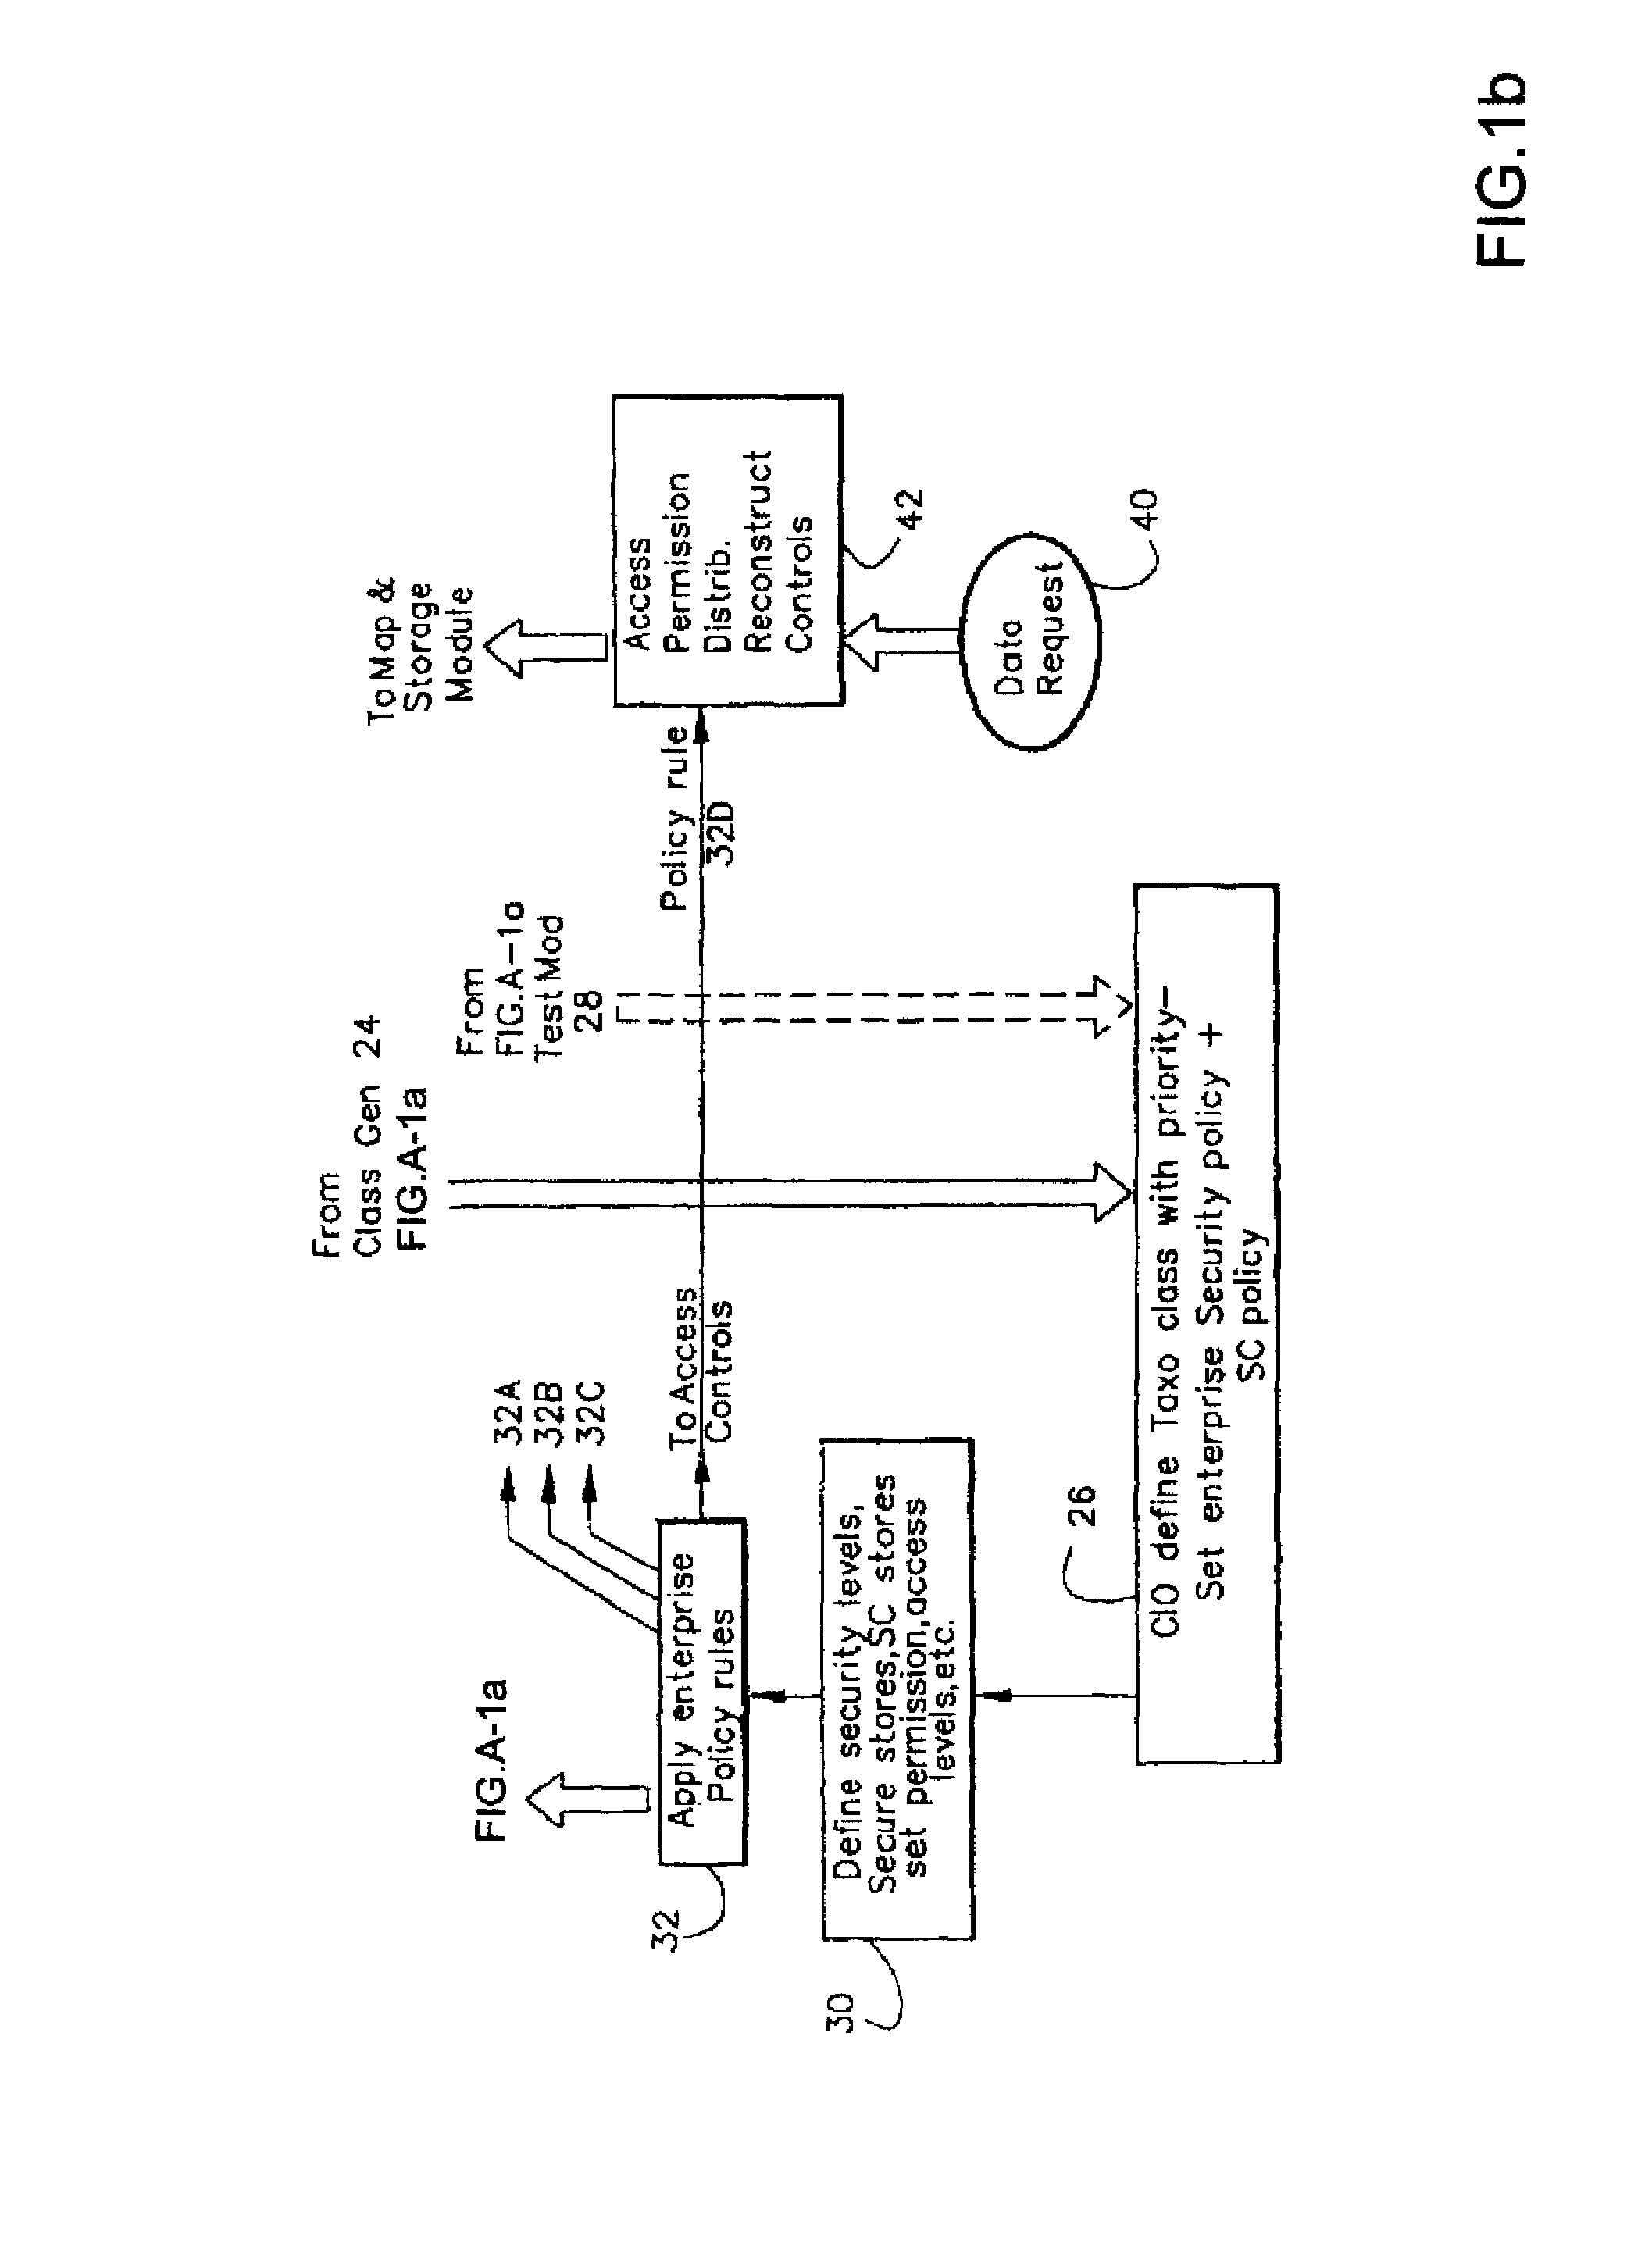 Information infrastructure management tools with extractor, secure storage, content analysis and classification and method therefor